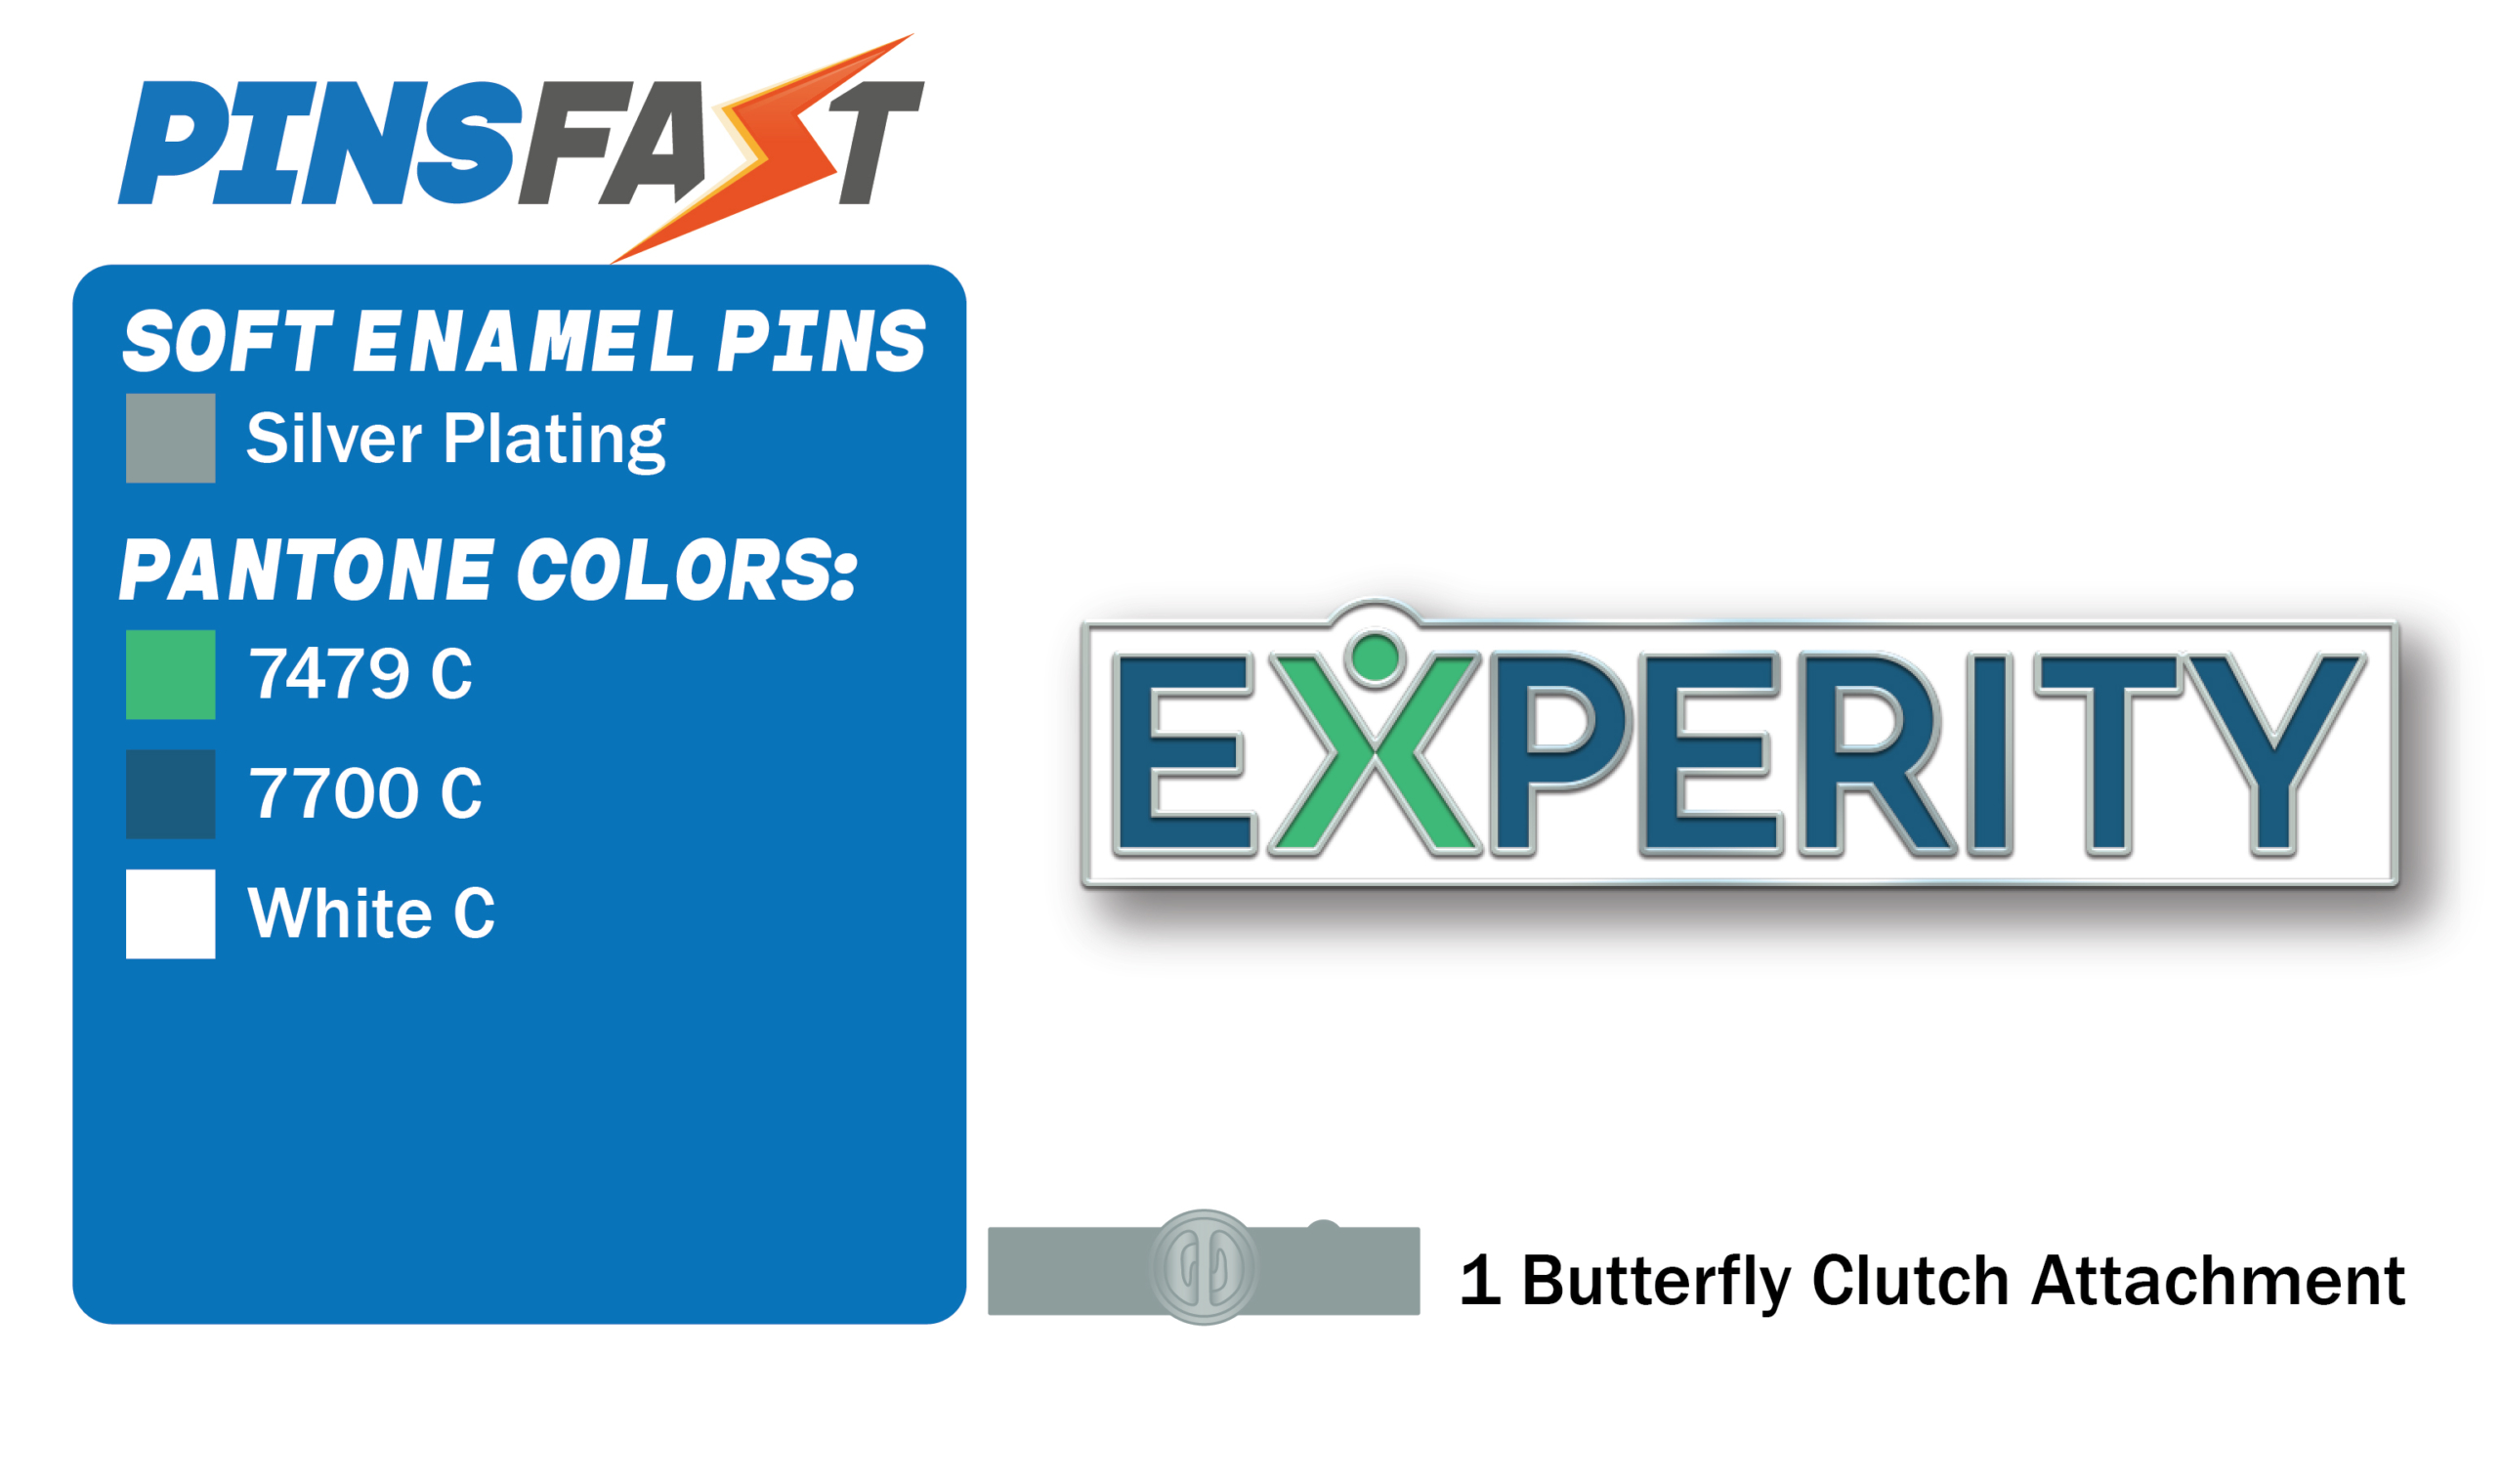 Experity Pins